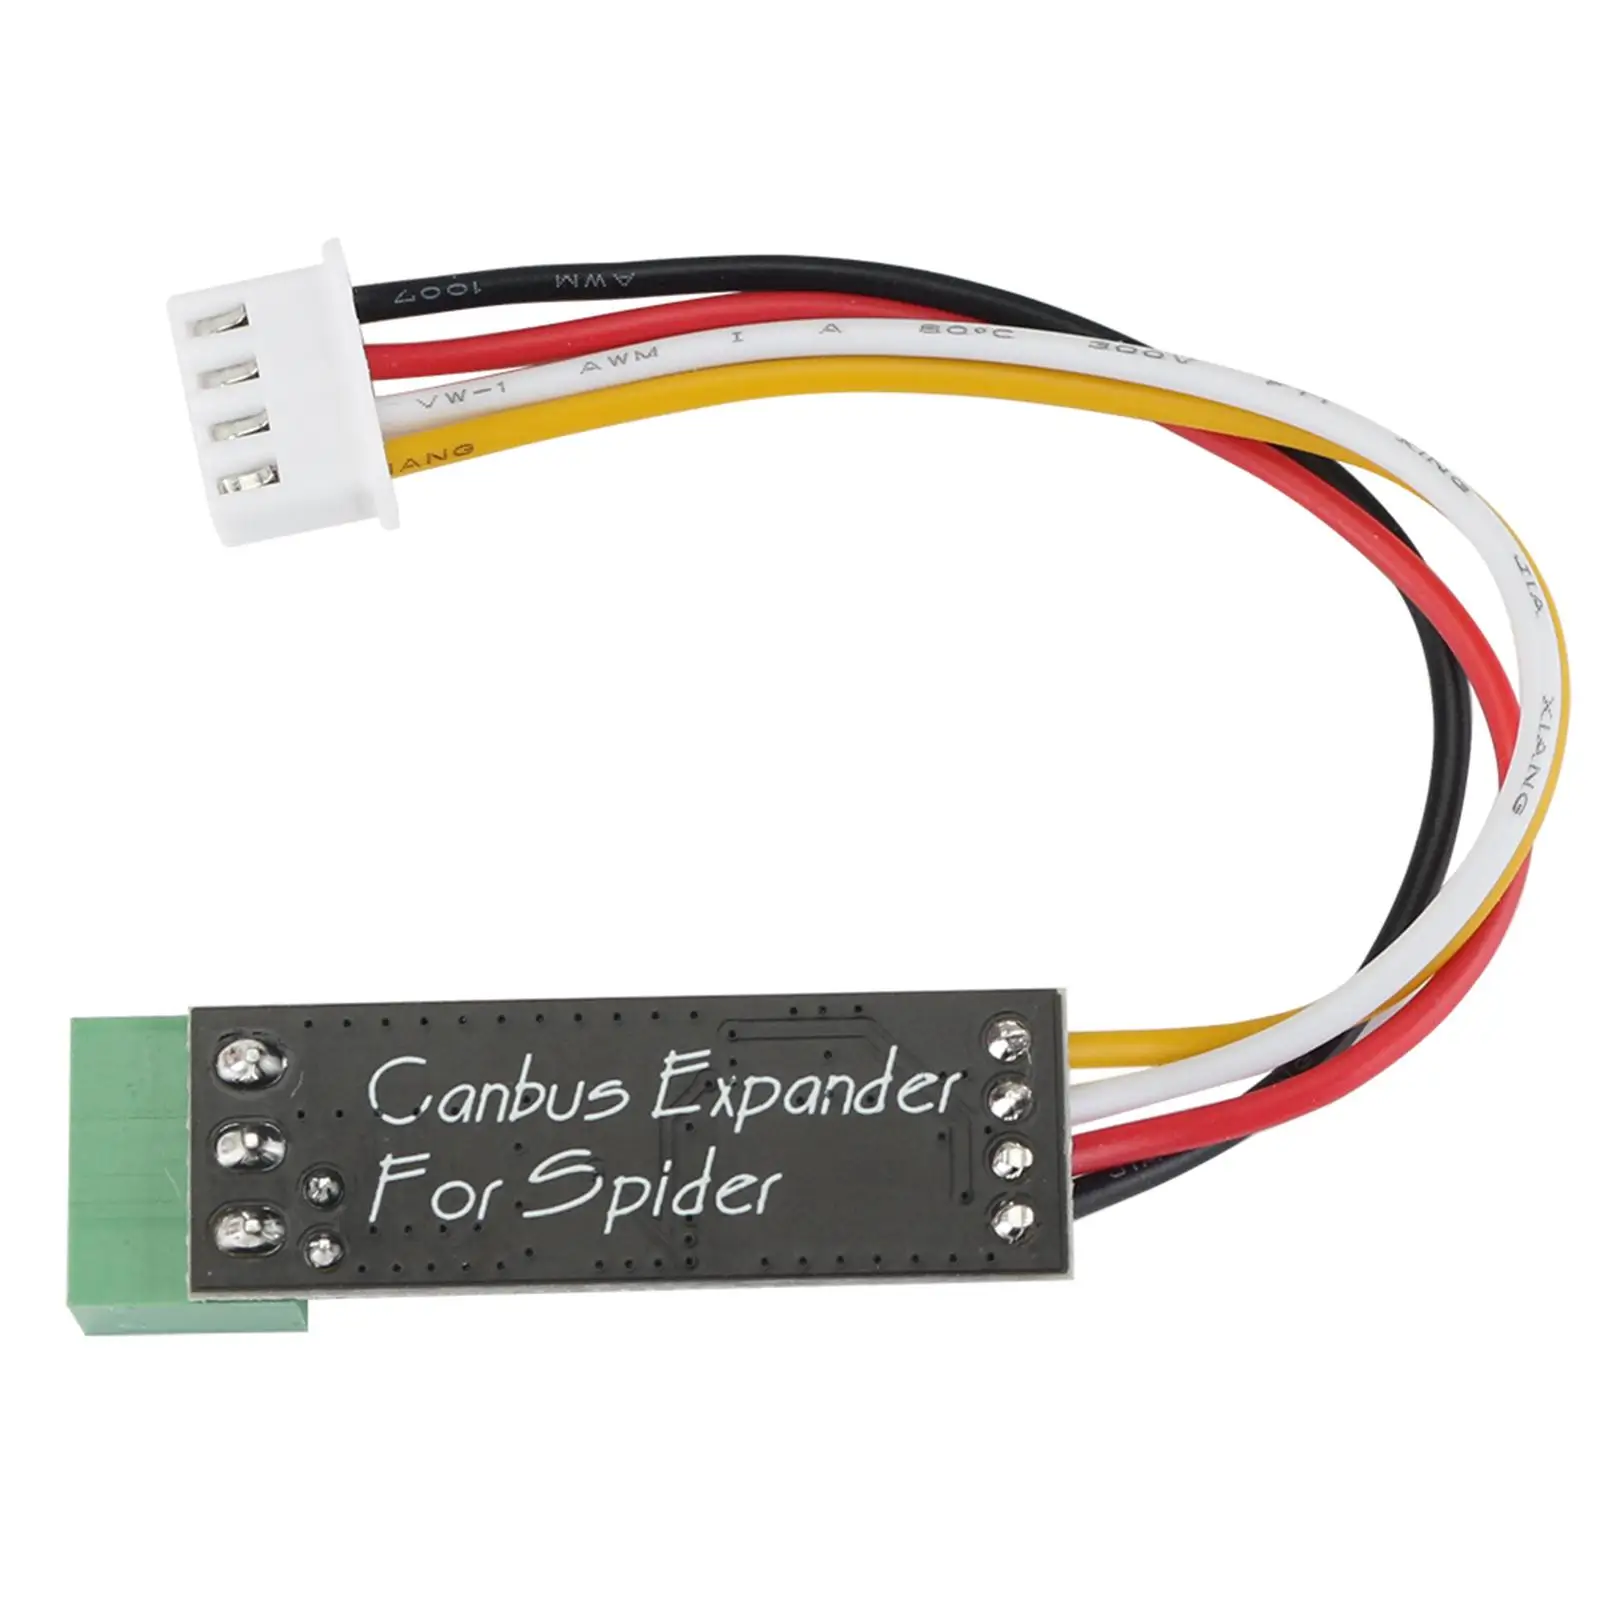 Canbus Expander Module Expander Replacement Accessories for Spider Board